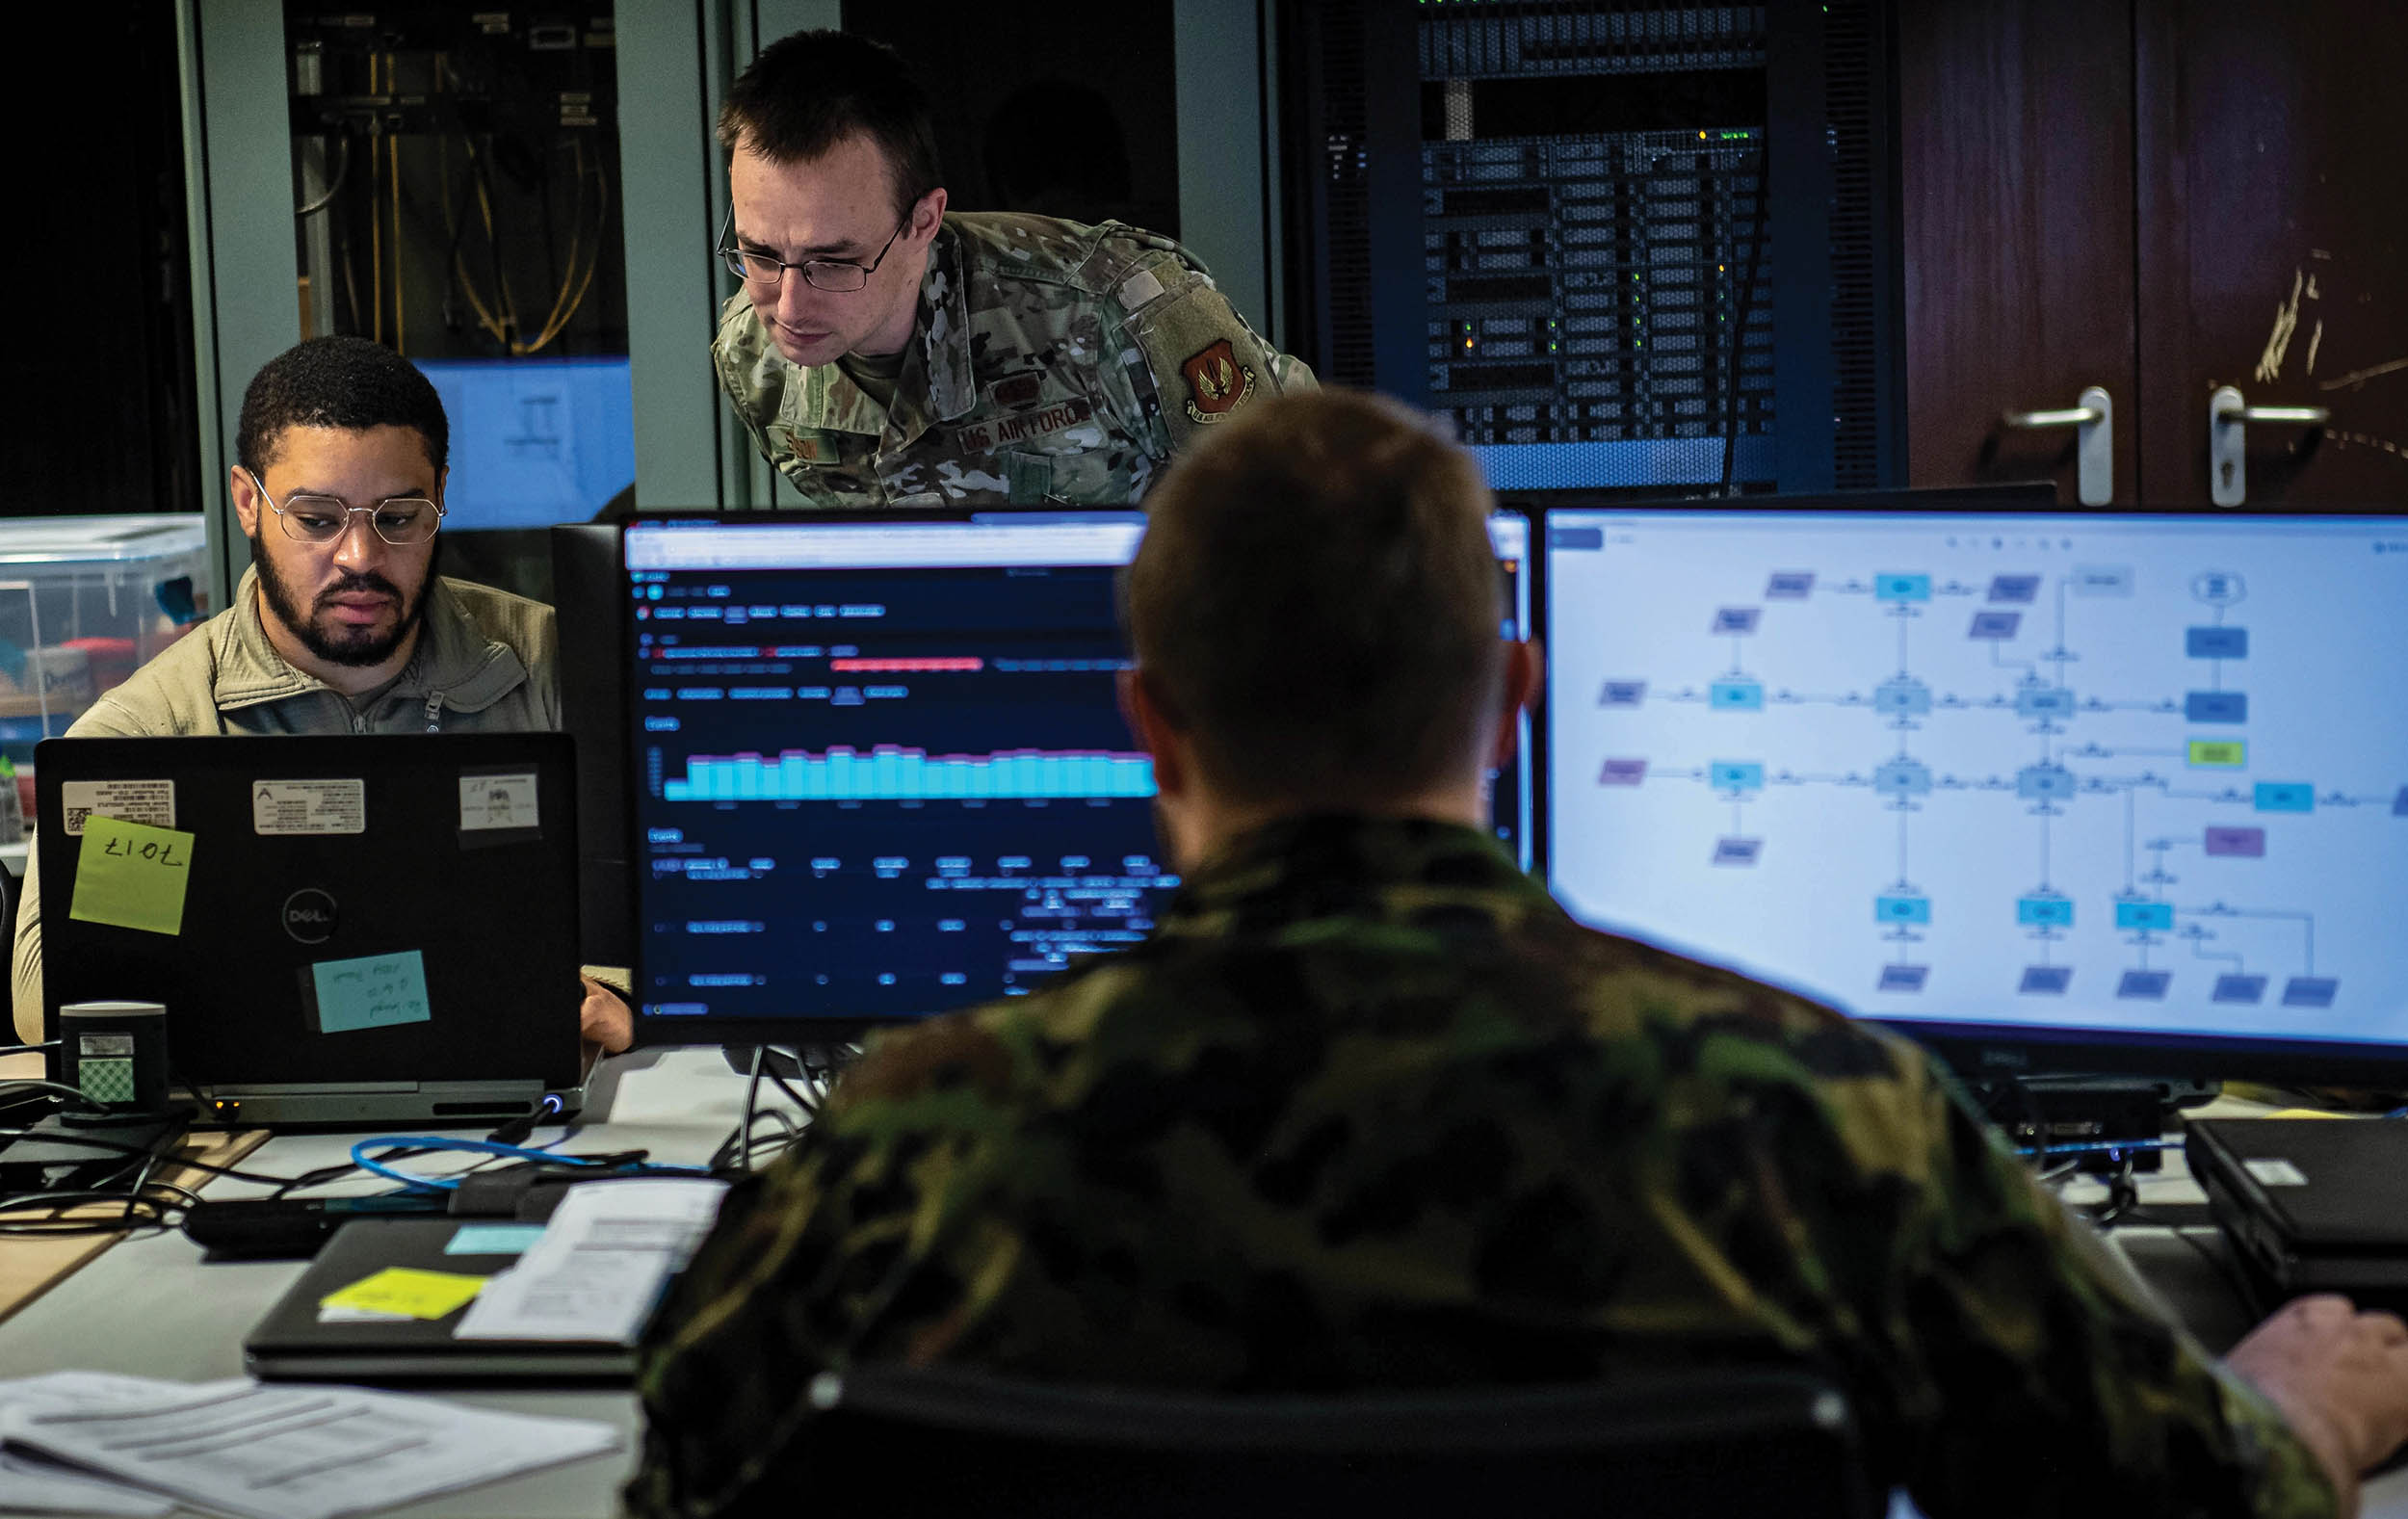 Participants analyze metadata to identify any suspicious activity on network during 2-week cyber exercise Tacet Venari, at Ramstein Air Base, Germany, May 12, 2022 (U.S. Air Force/Jared Lovett)